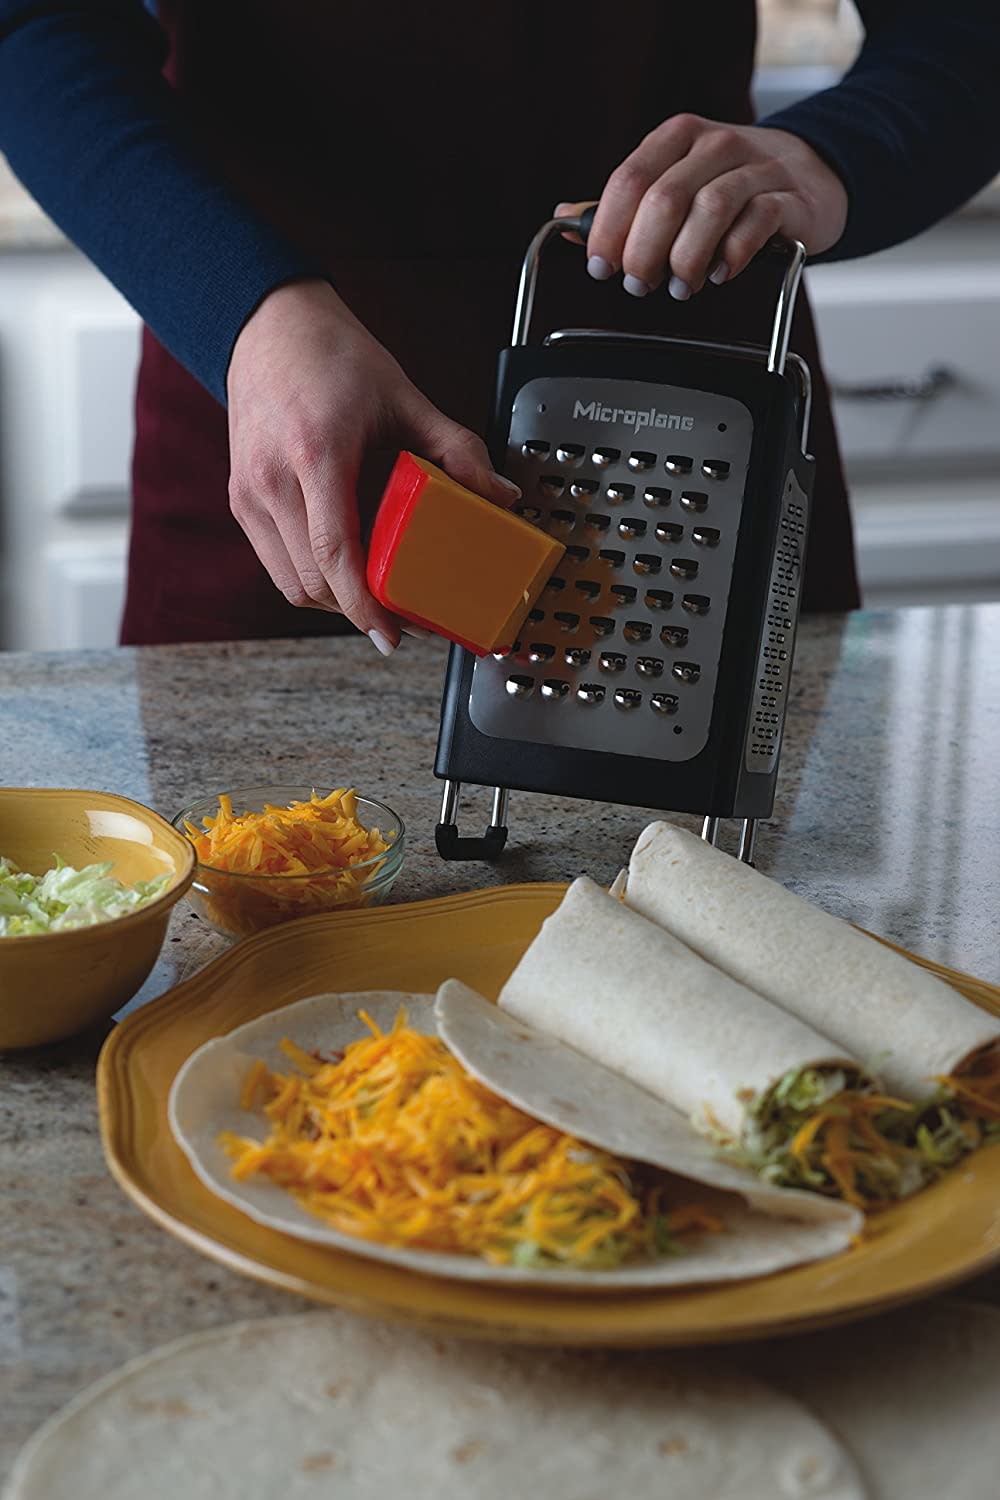 Microplane Specialty Series Box Grater